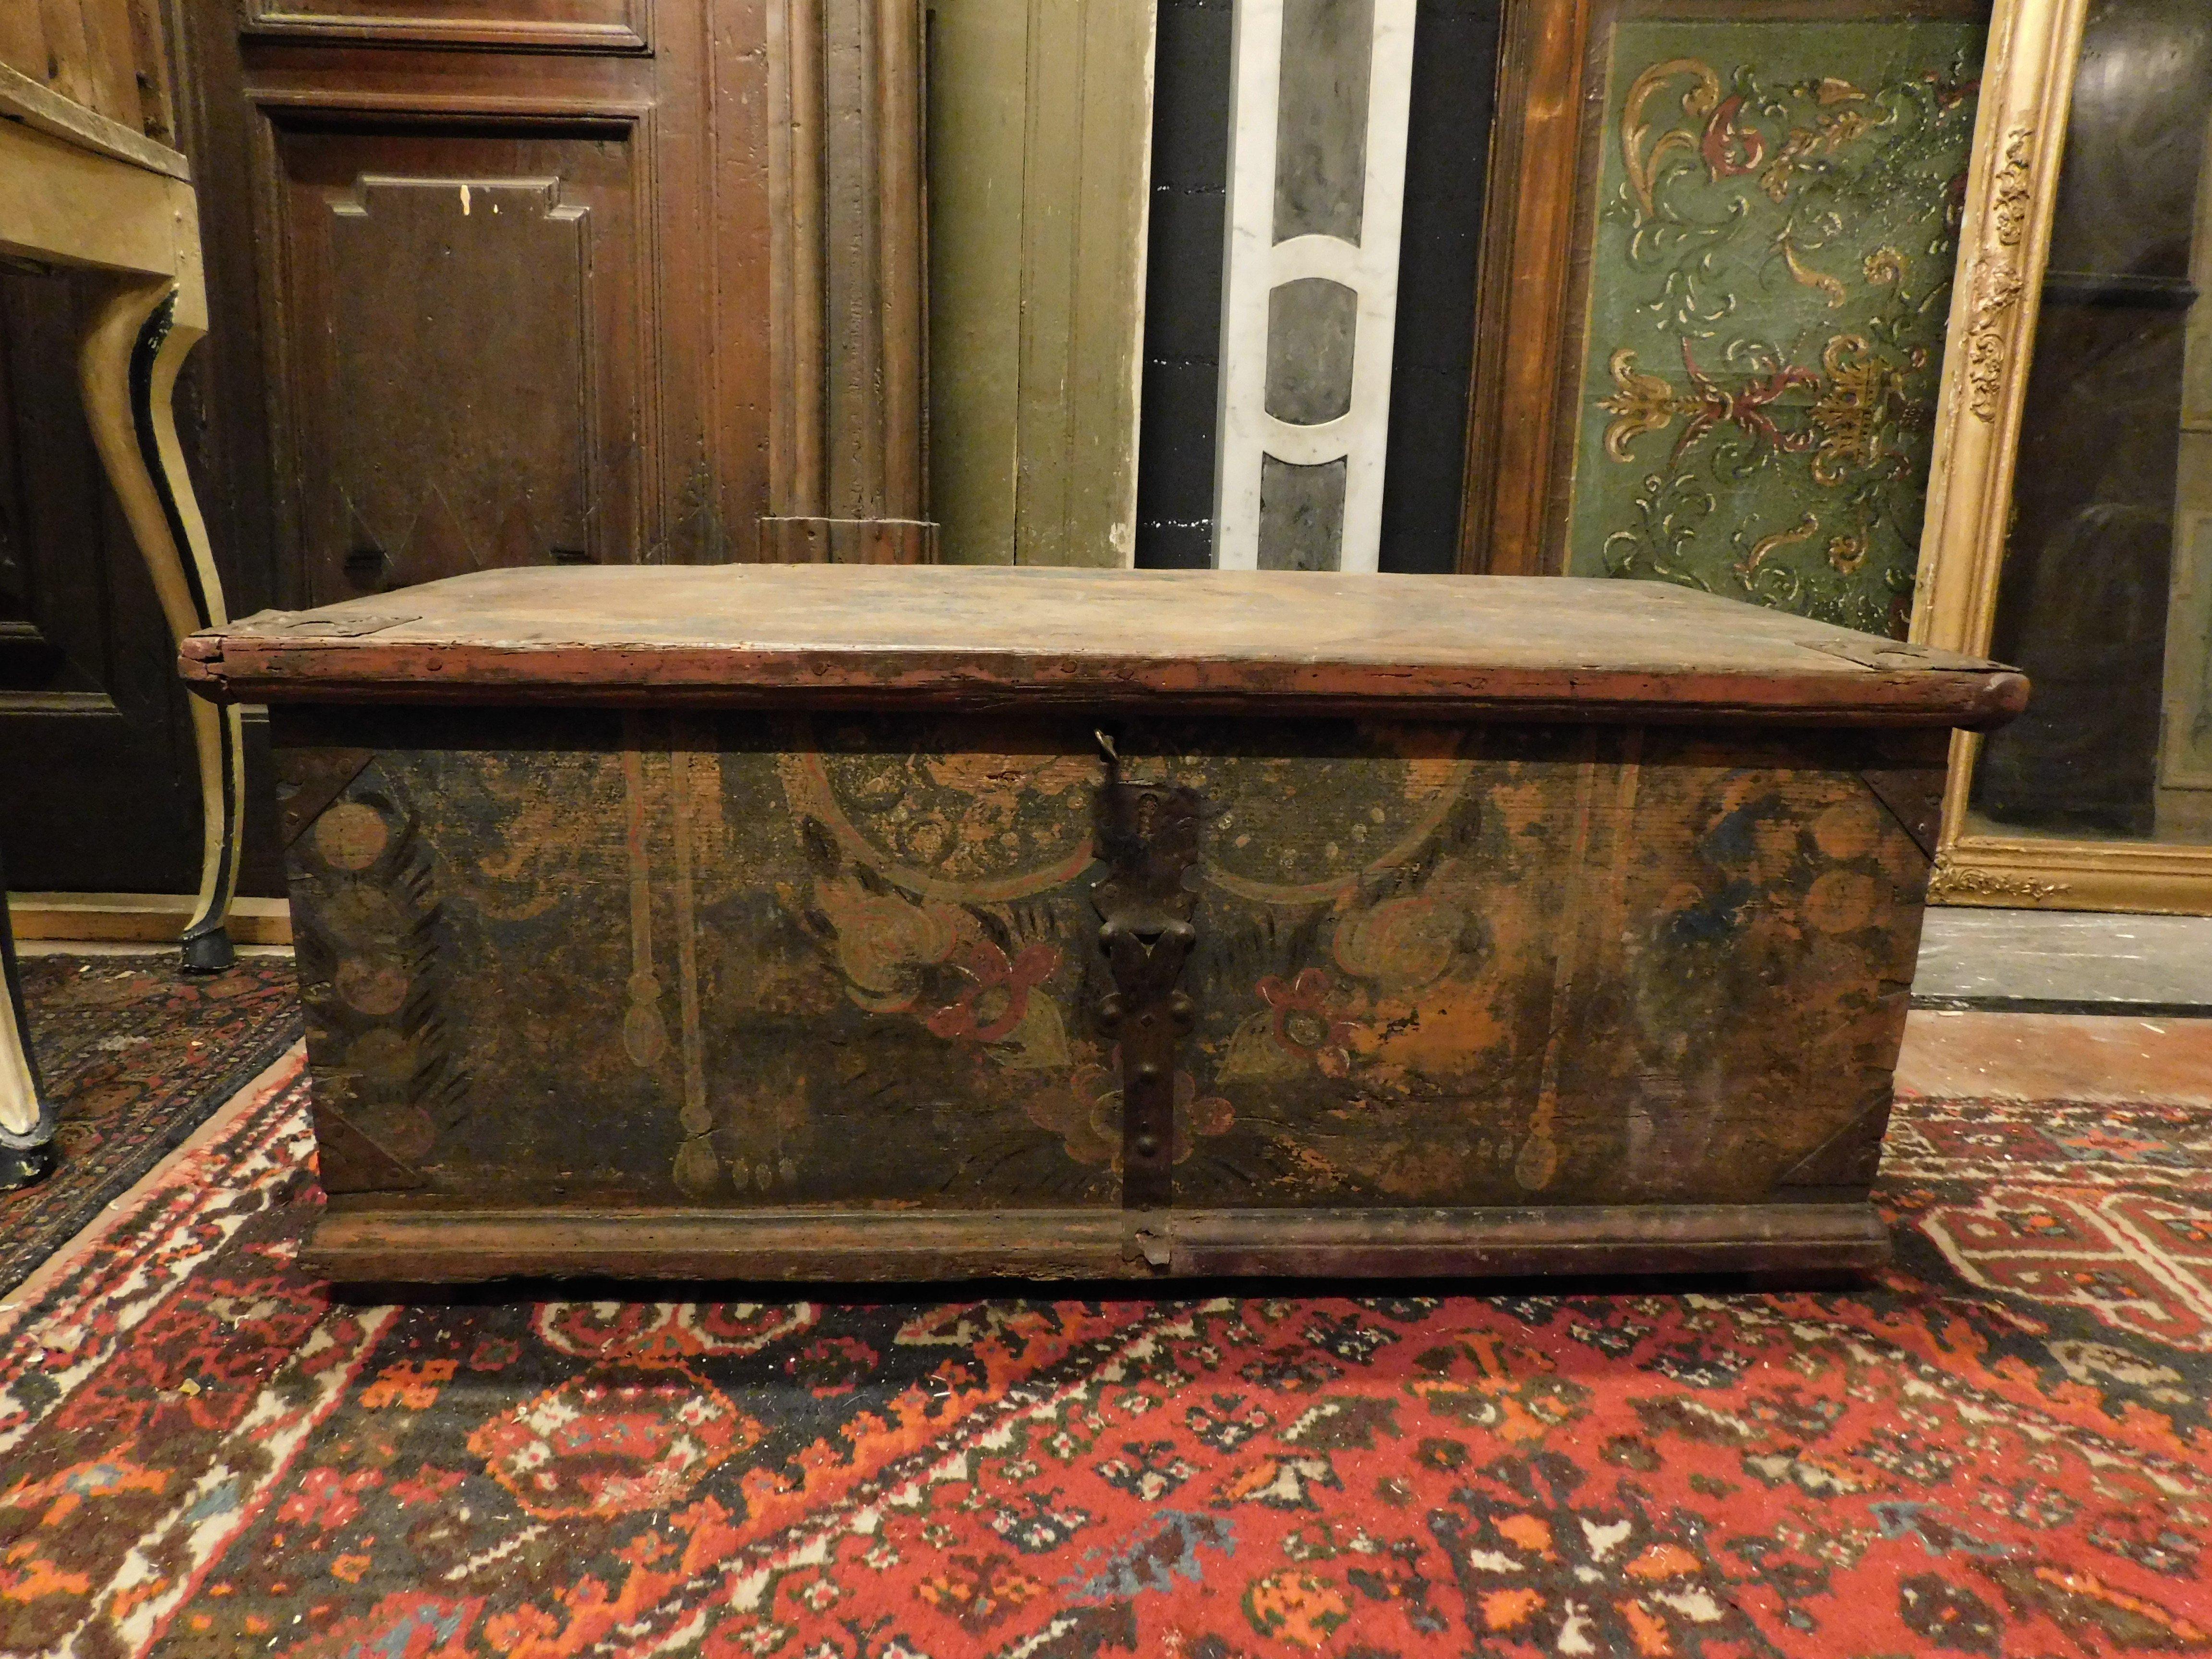 Ancient chest with opening shelf, lacquered and hand painted on solid larch wood, built in Italy in the 19th century, measuring cm W 103 x H 42 x D 50.
Ideal as a container or as a seat.